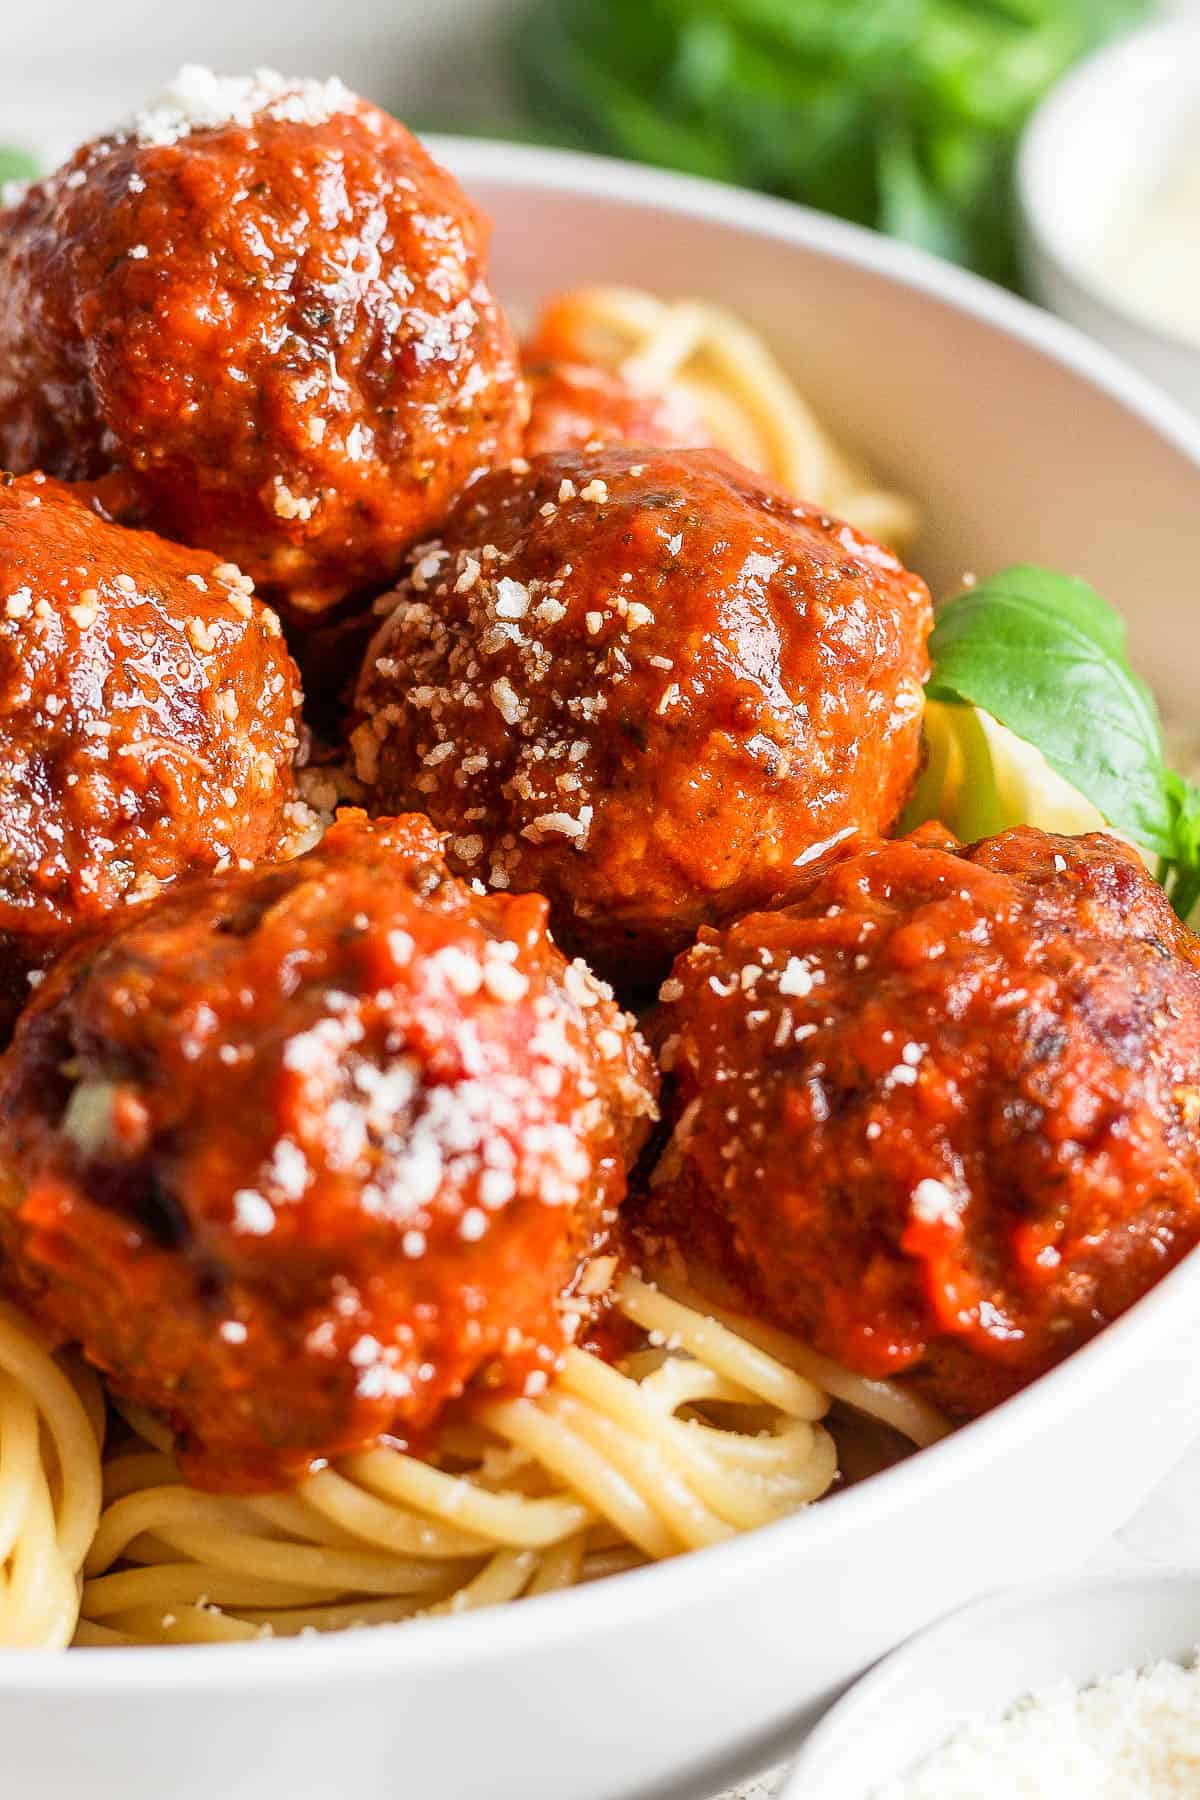 Close-up shot of smoked meatballs in a bowl of noodles.